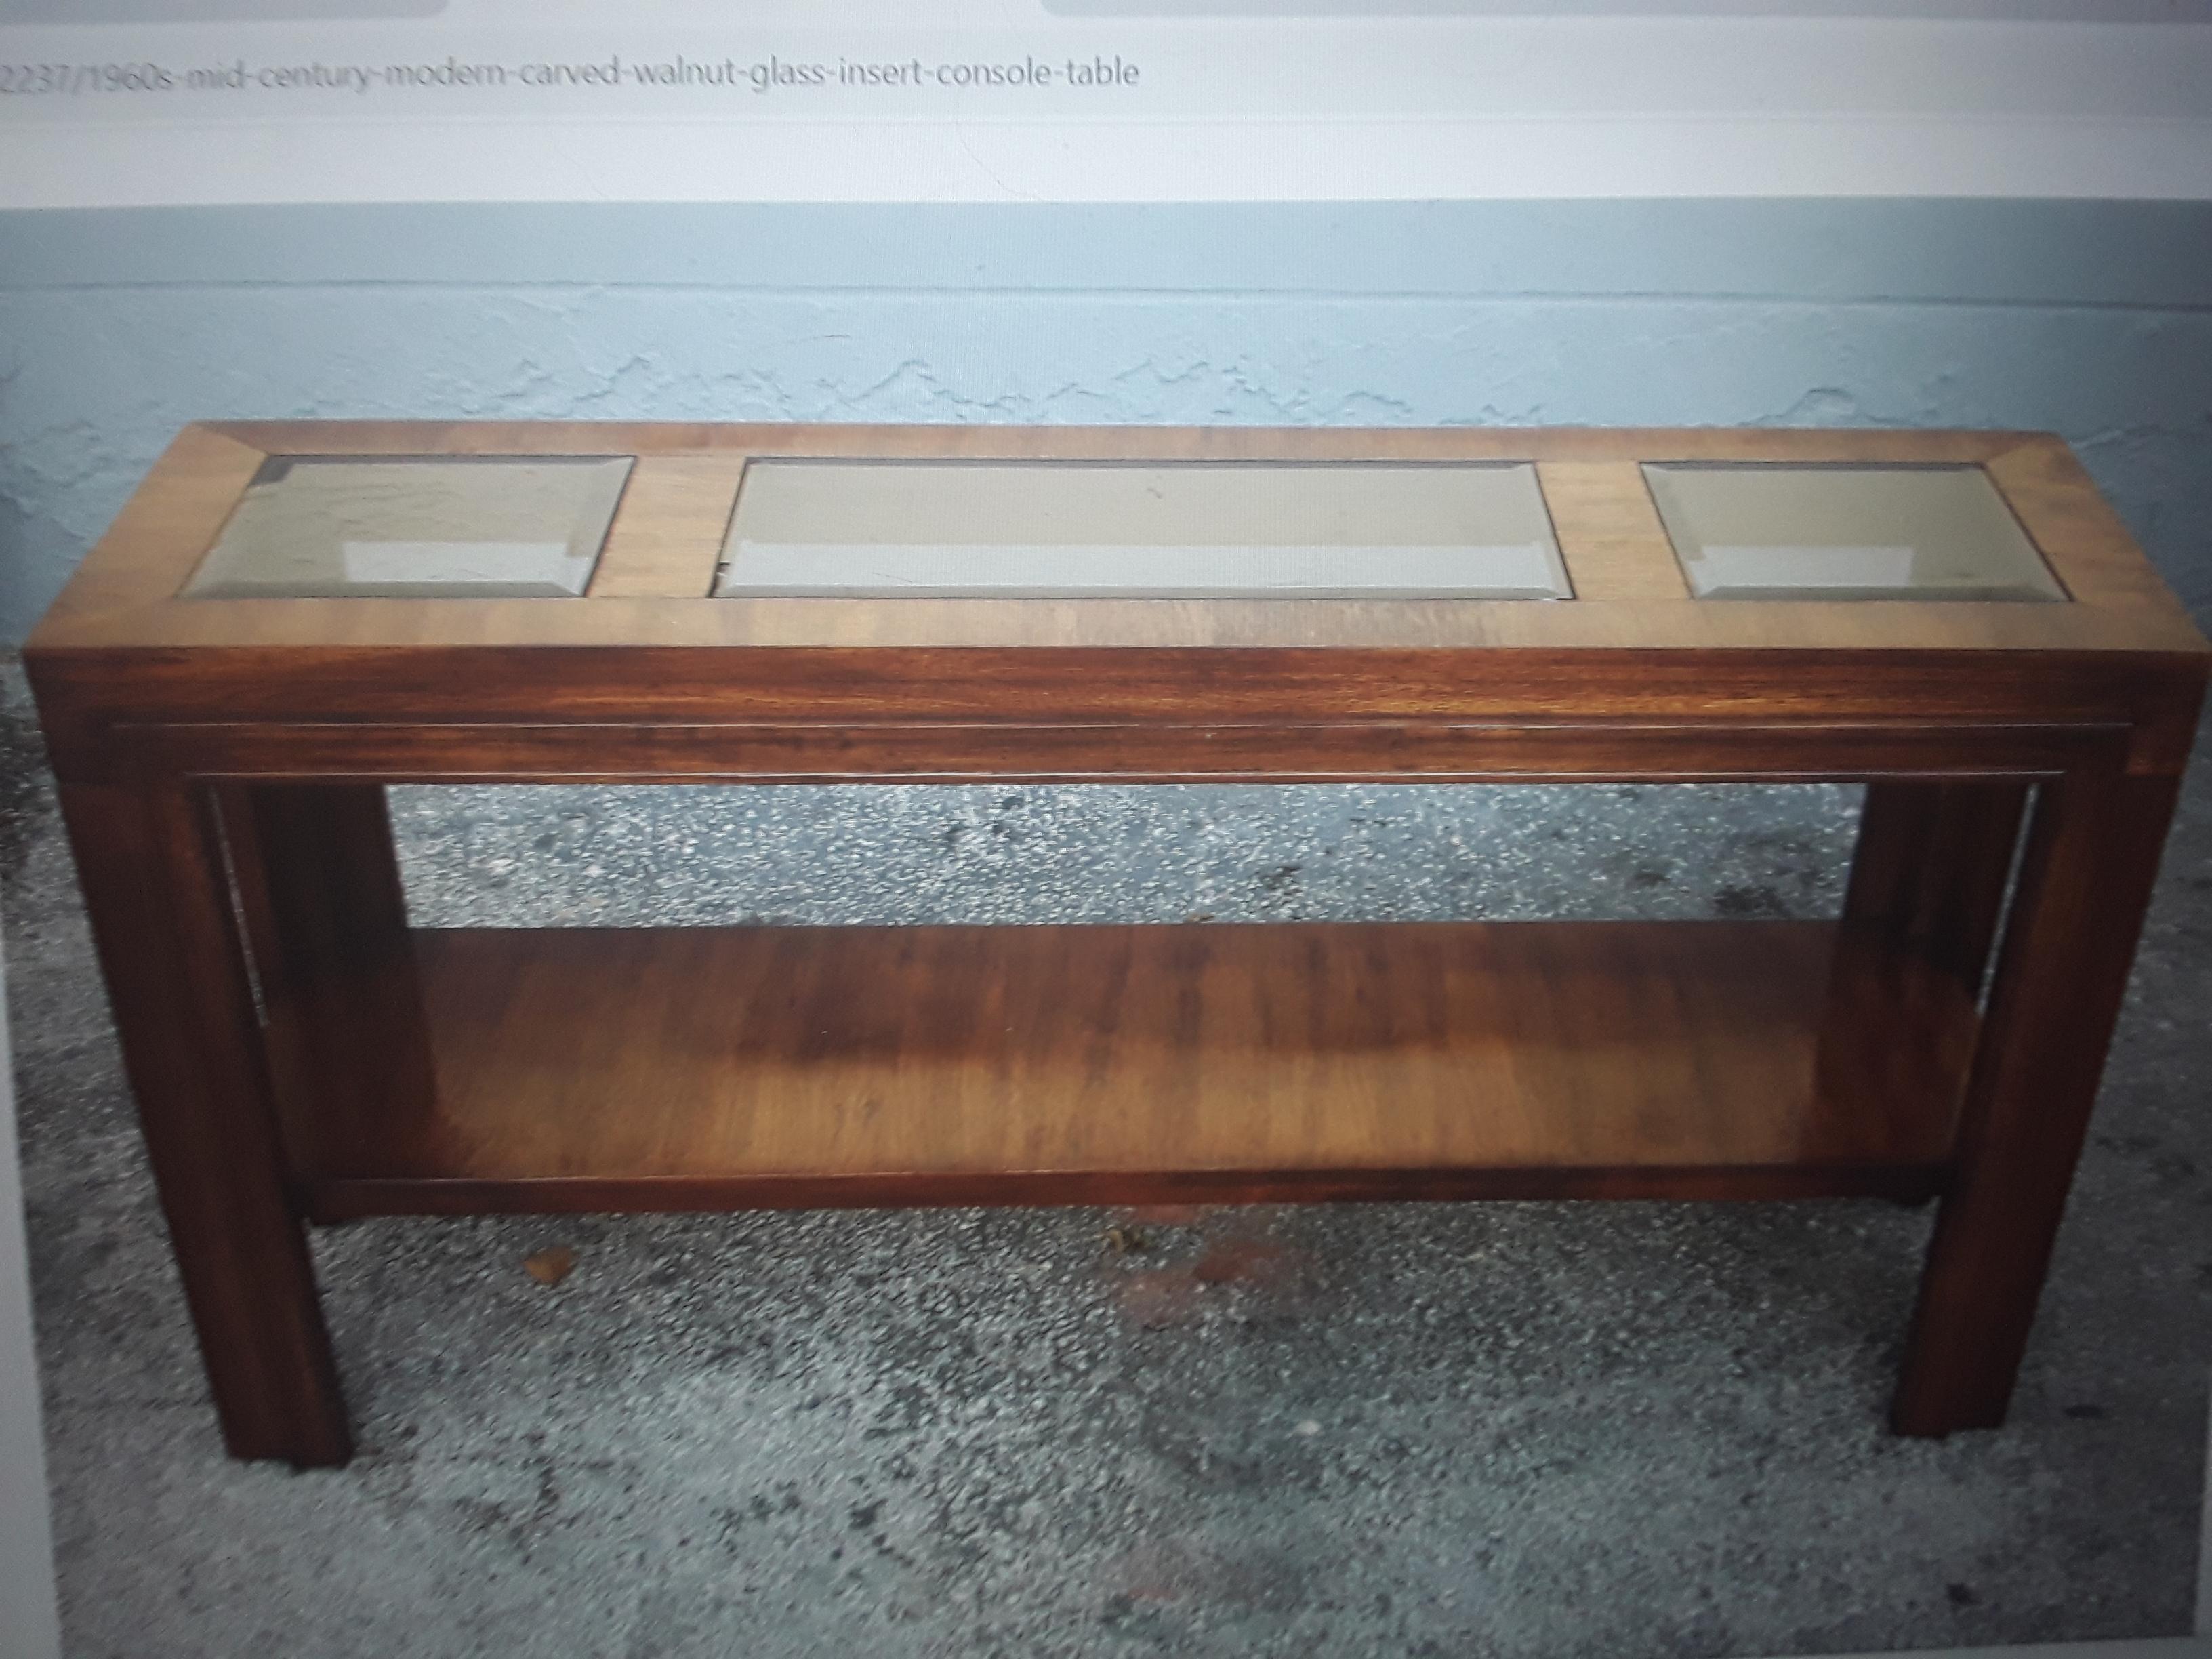 1960's Mid Century Modern Carved Walnut/ Glass Insert Console Table/ Sofa Table For Sale 5